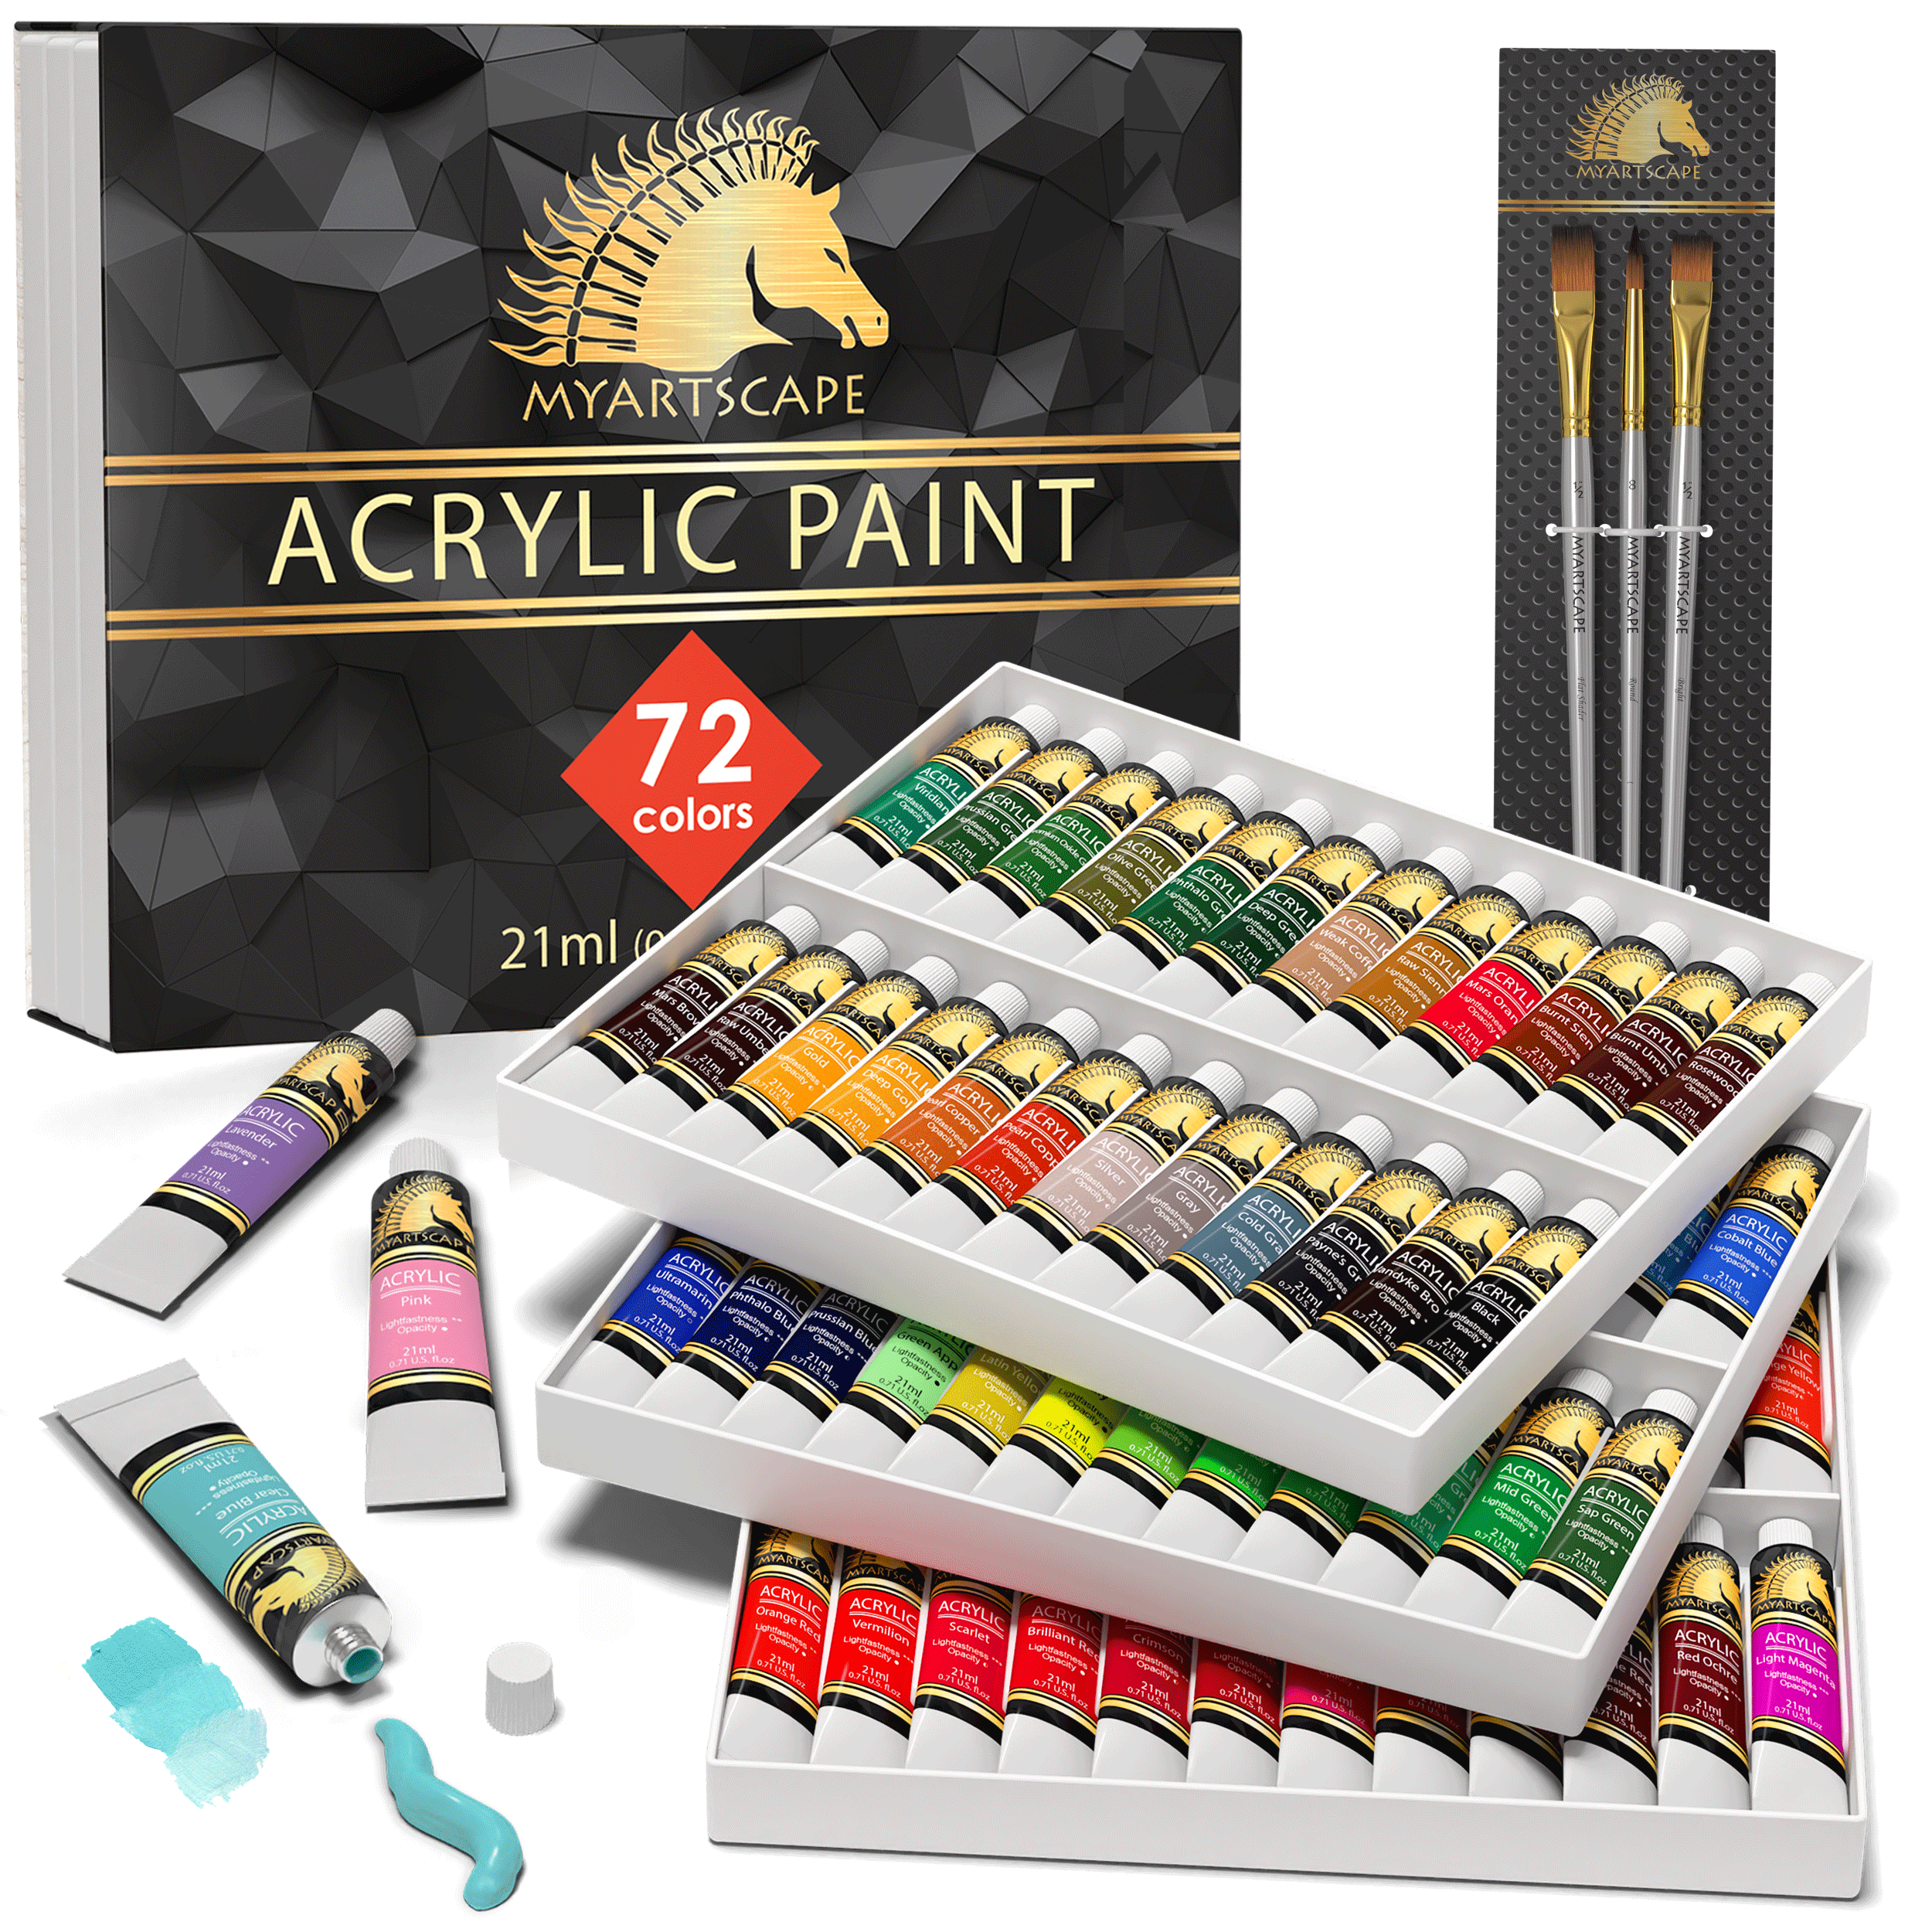 MyArtscape Acrylic Paint Set - 12 x 21ml tubes - Lightfast - Heavy Body -  Rich Pigments - Great Tinting Strength - Acrylic Painting Supplies for